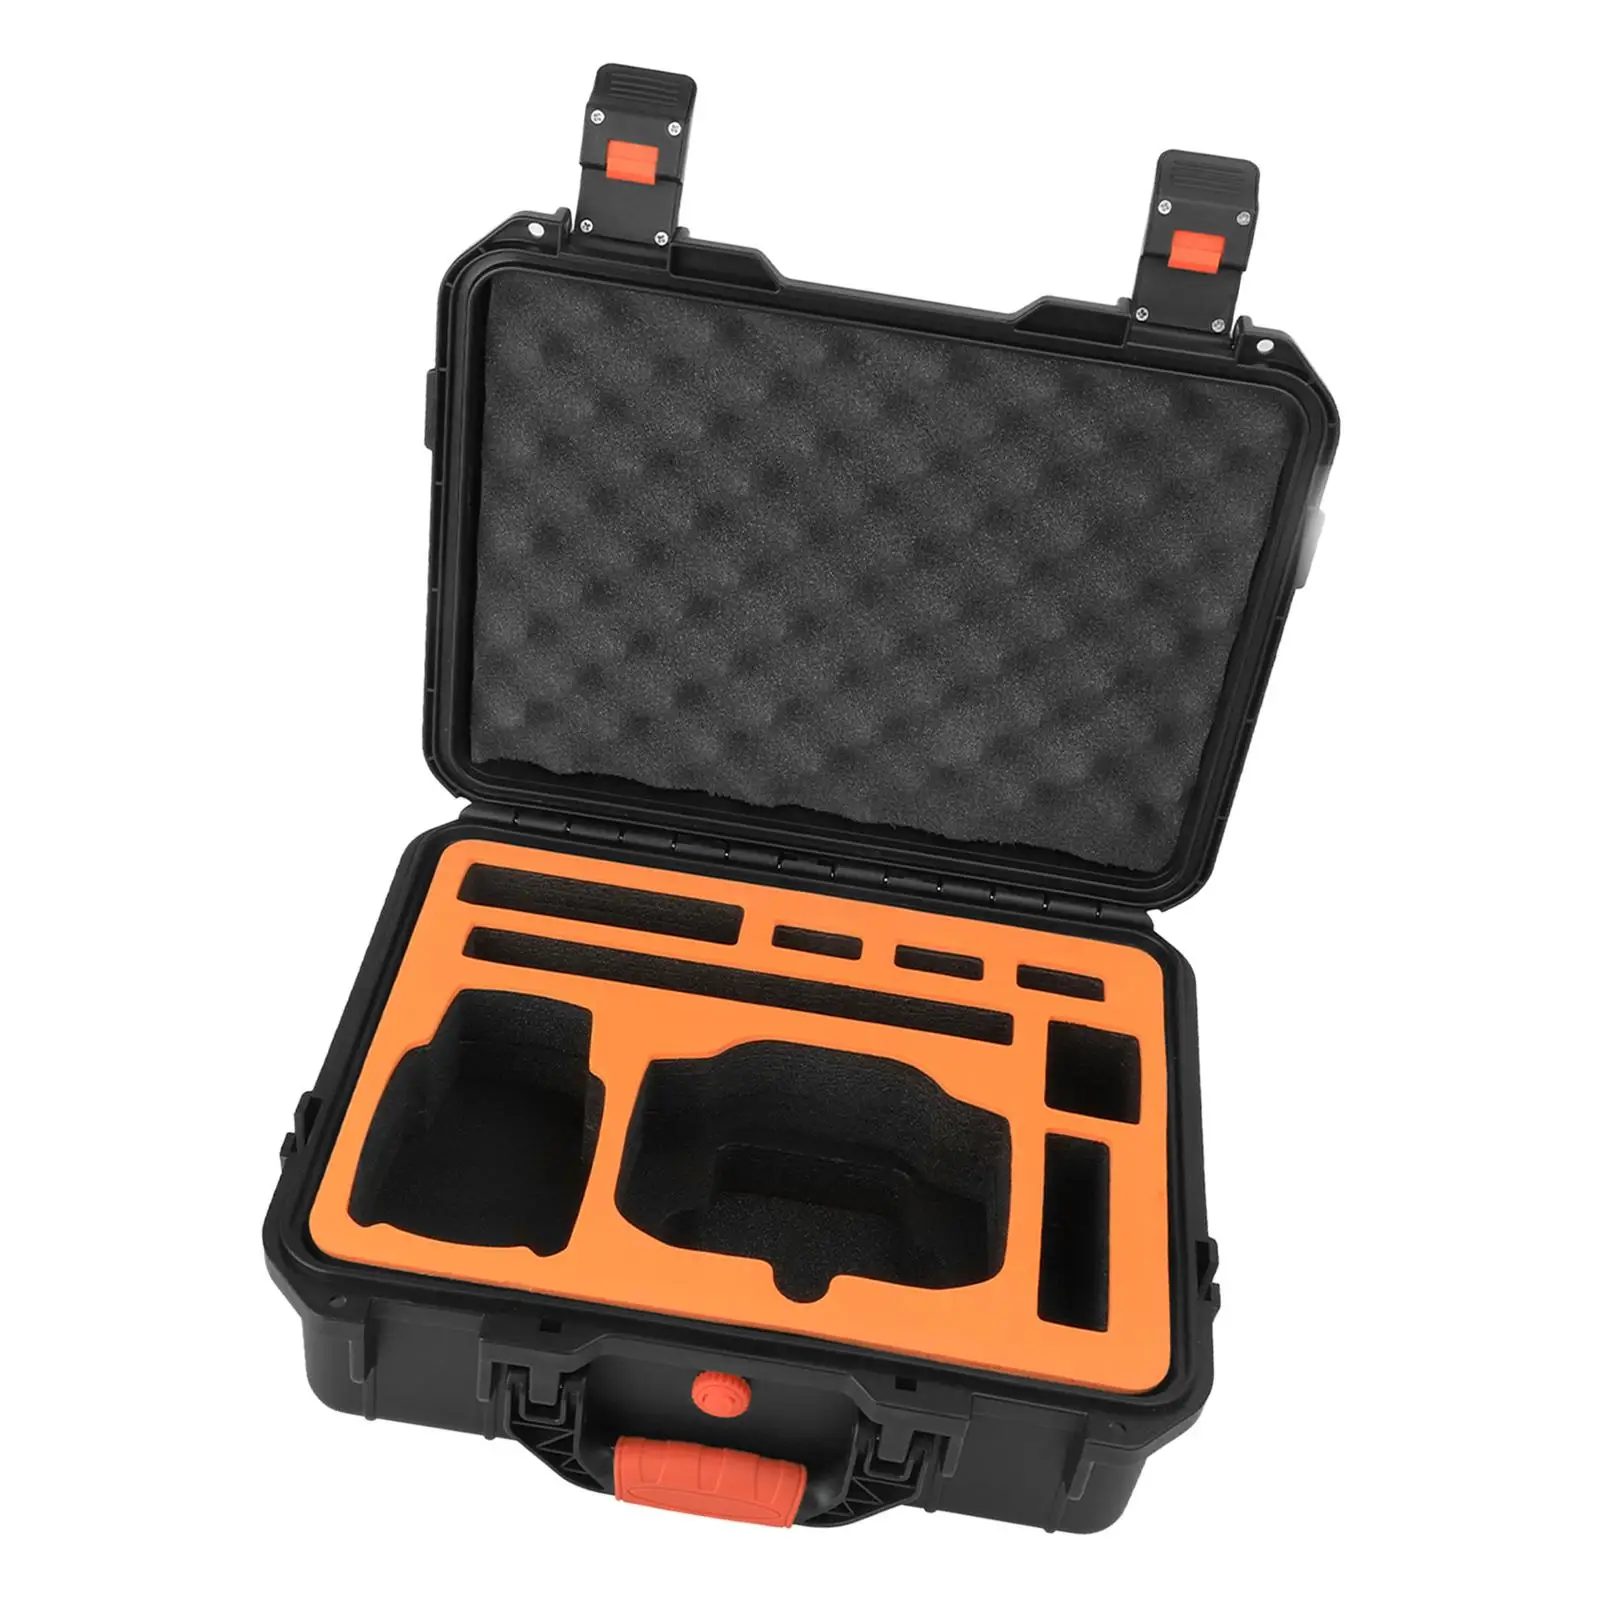 Portable Drone Carrying Case Storage Large Capacity Travel Case Storage Case Drone Carrying Handbag for Drone